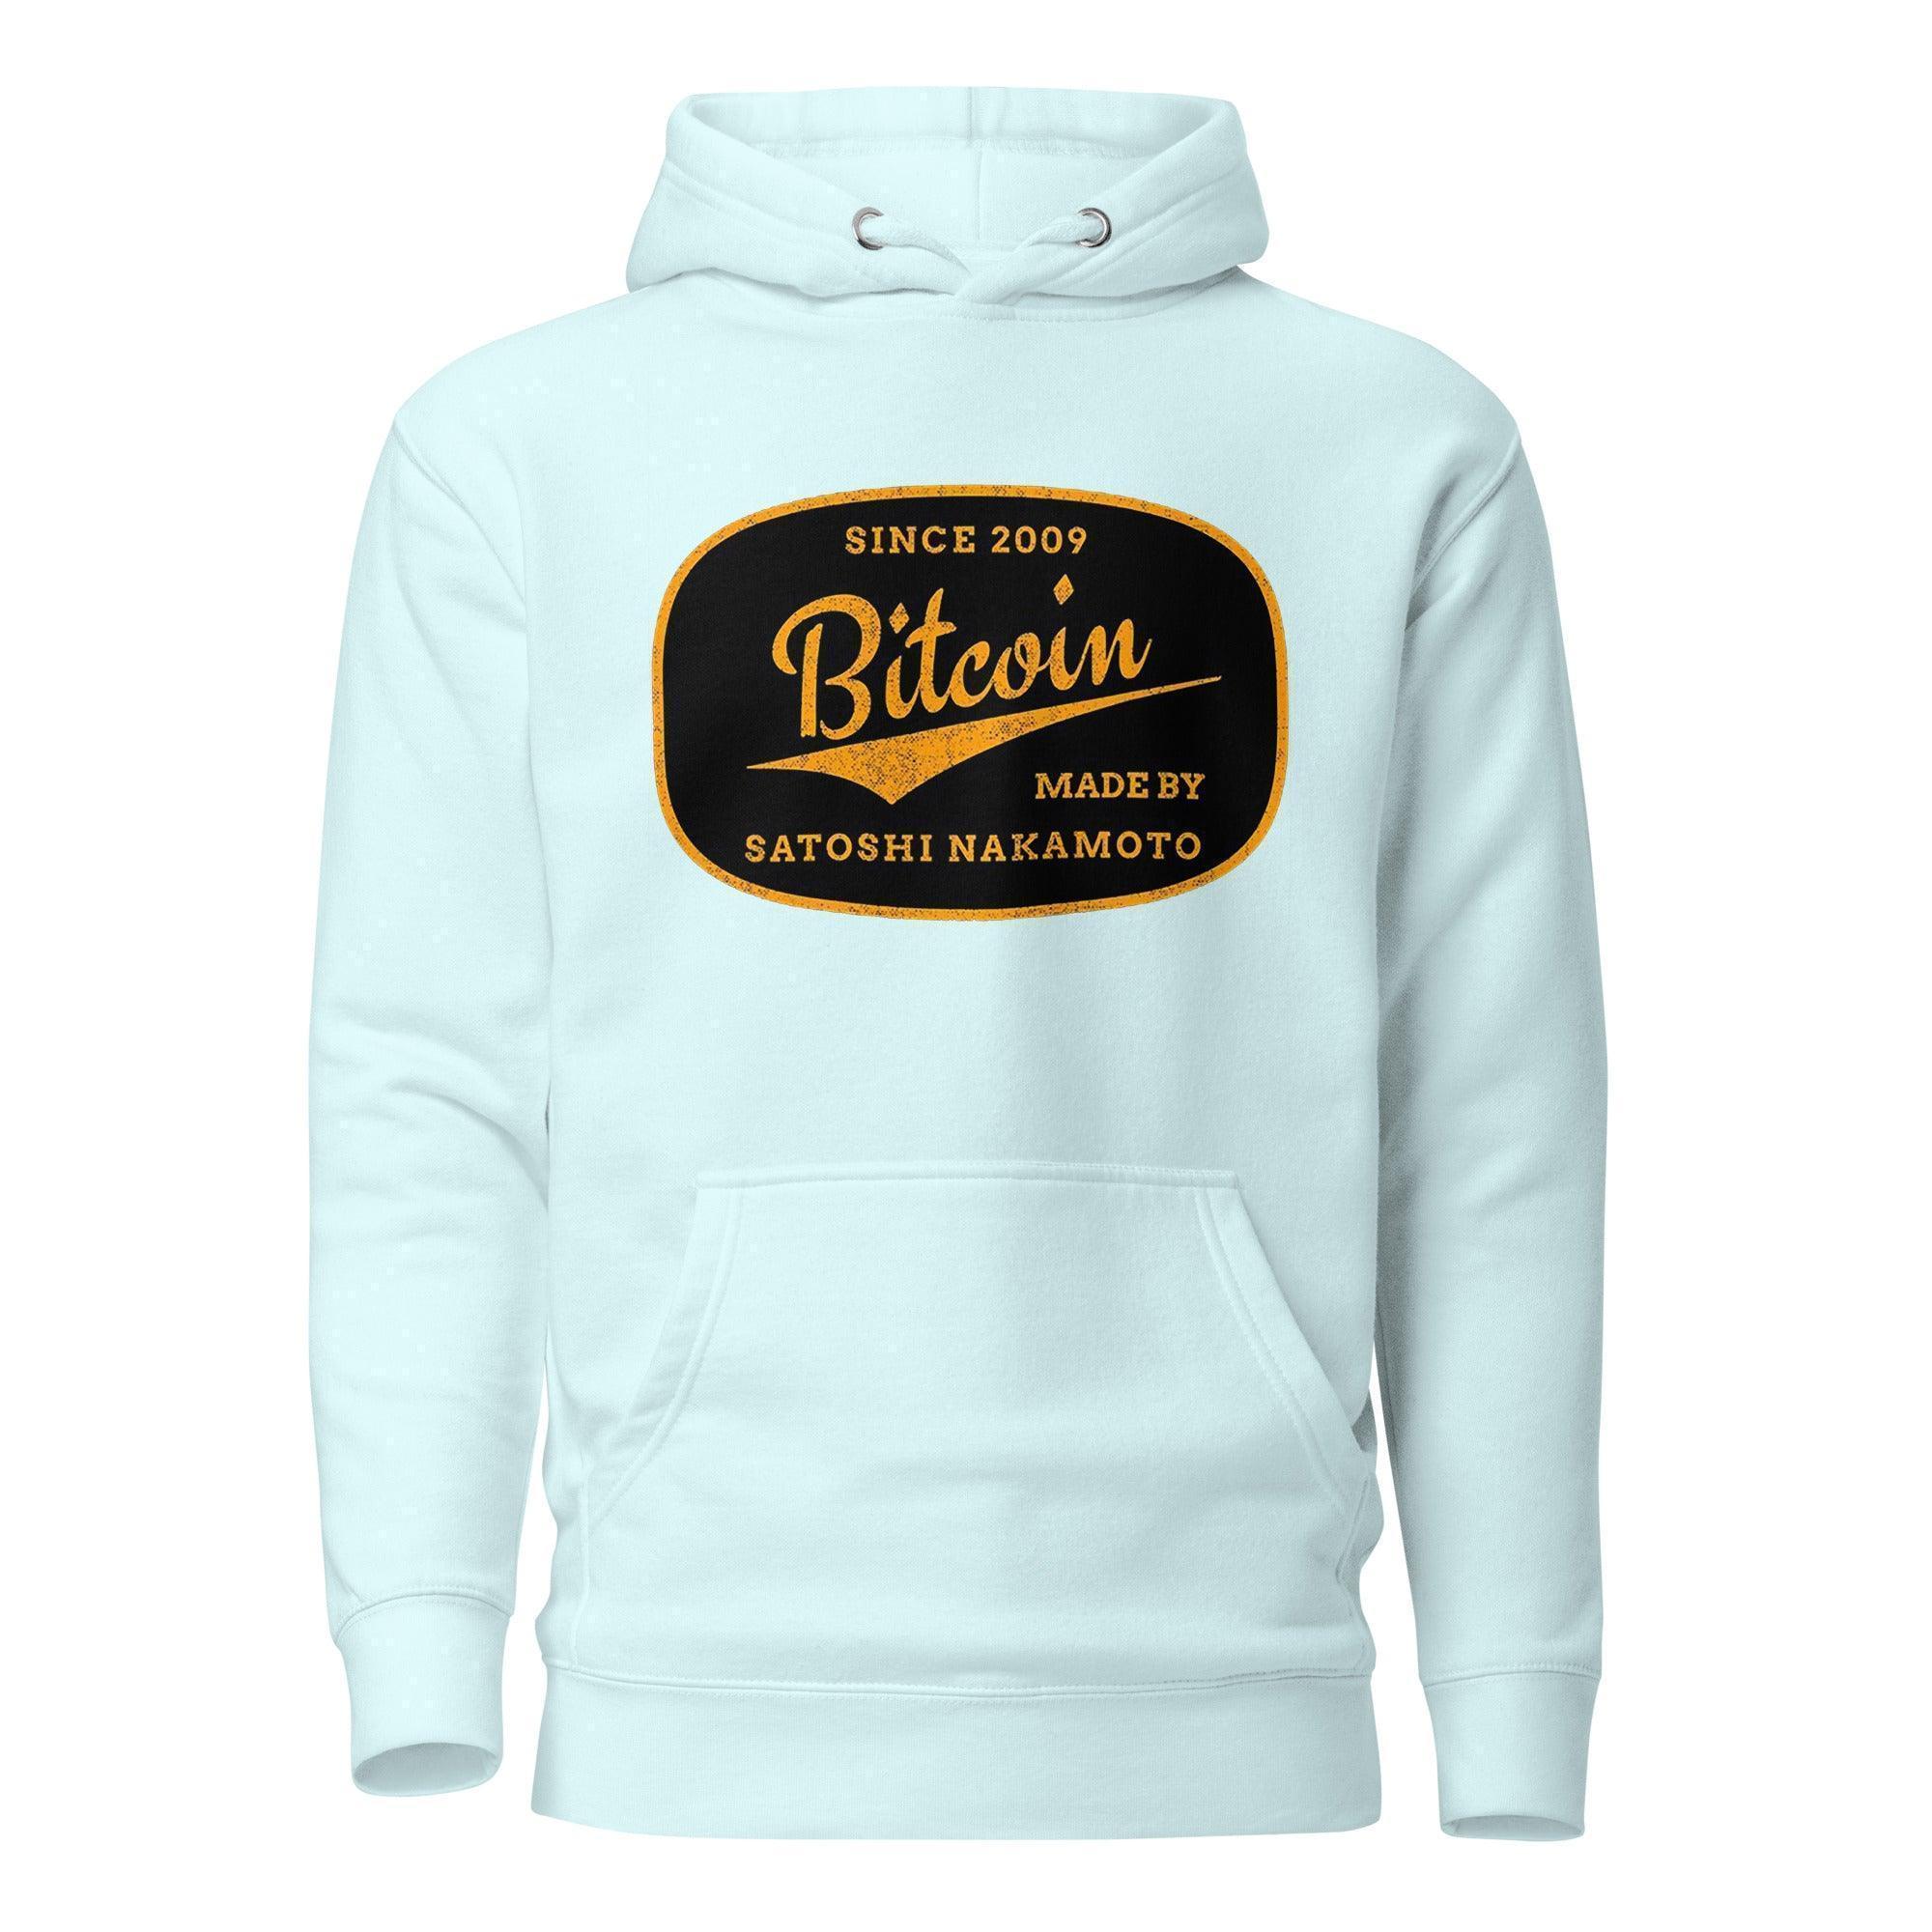 Bitcoin Since 2009 Pullover Hoodie - InvestmenTees